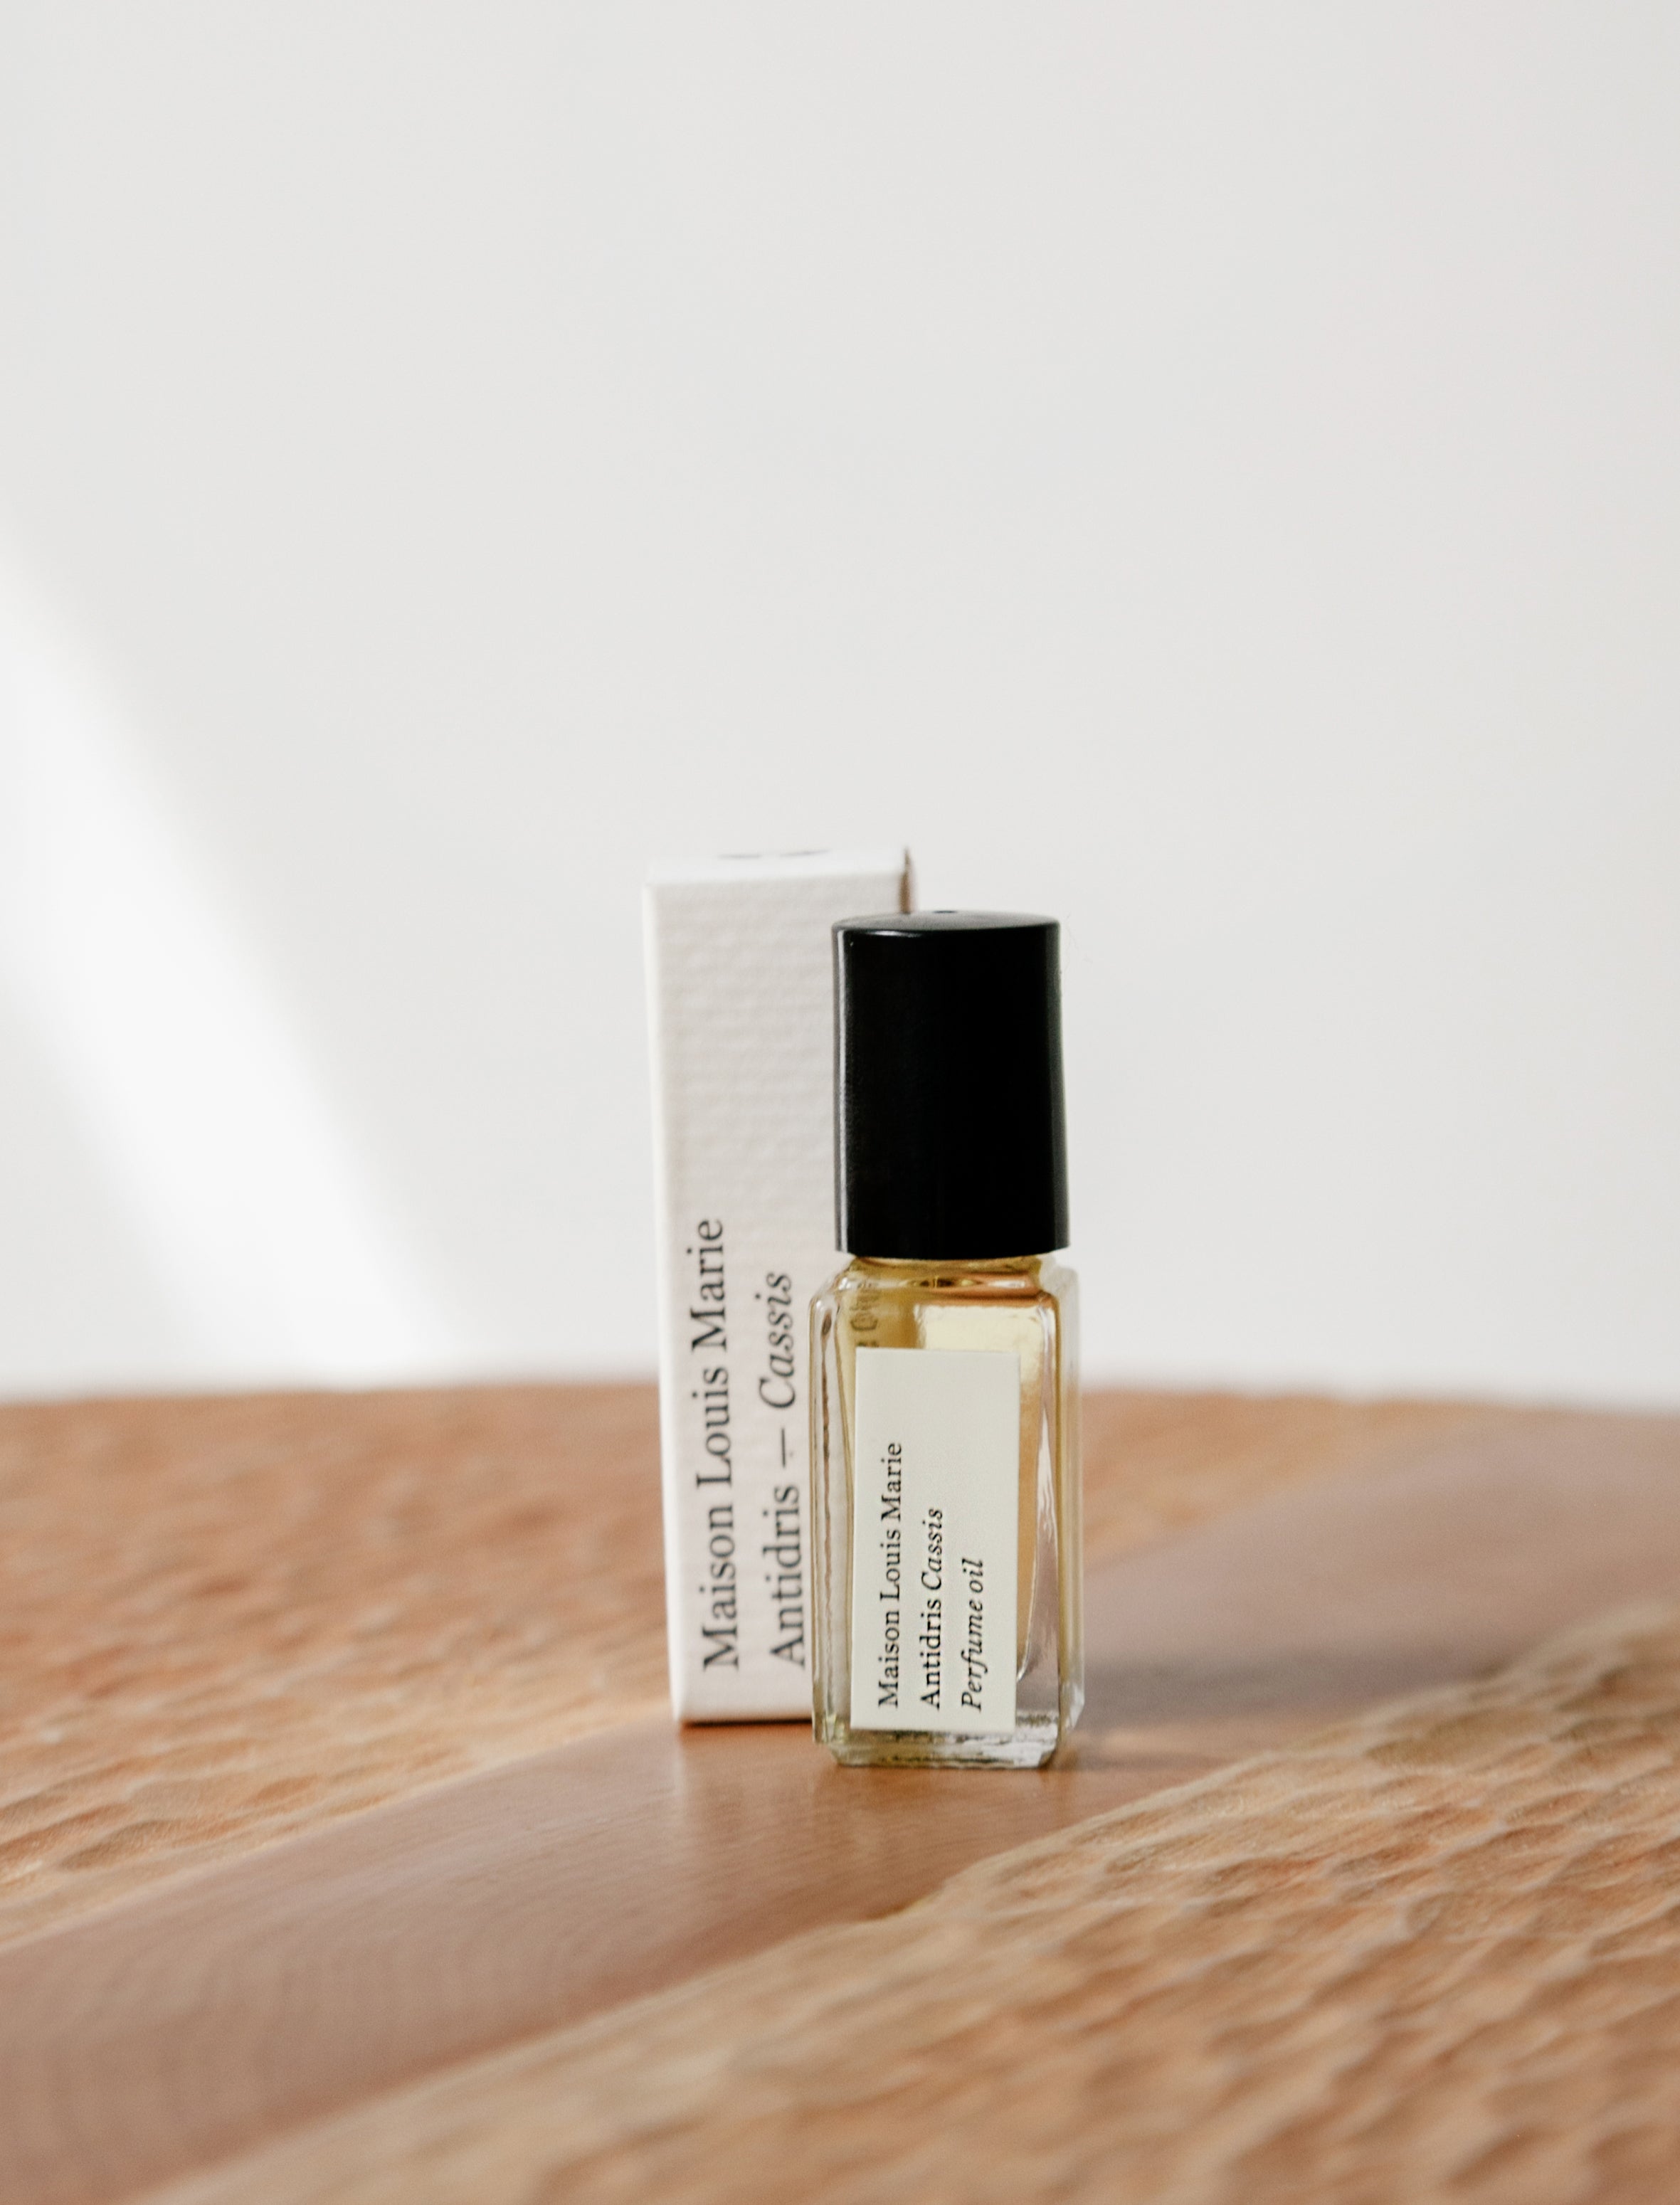 Maison Louis Marie Perfume Oil Rollerball Scent